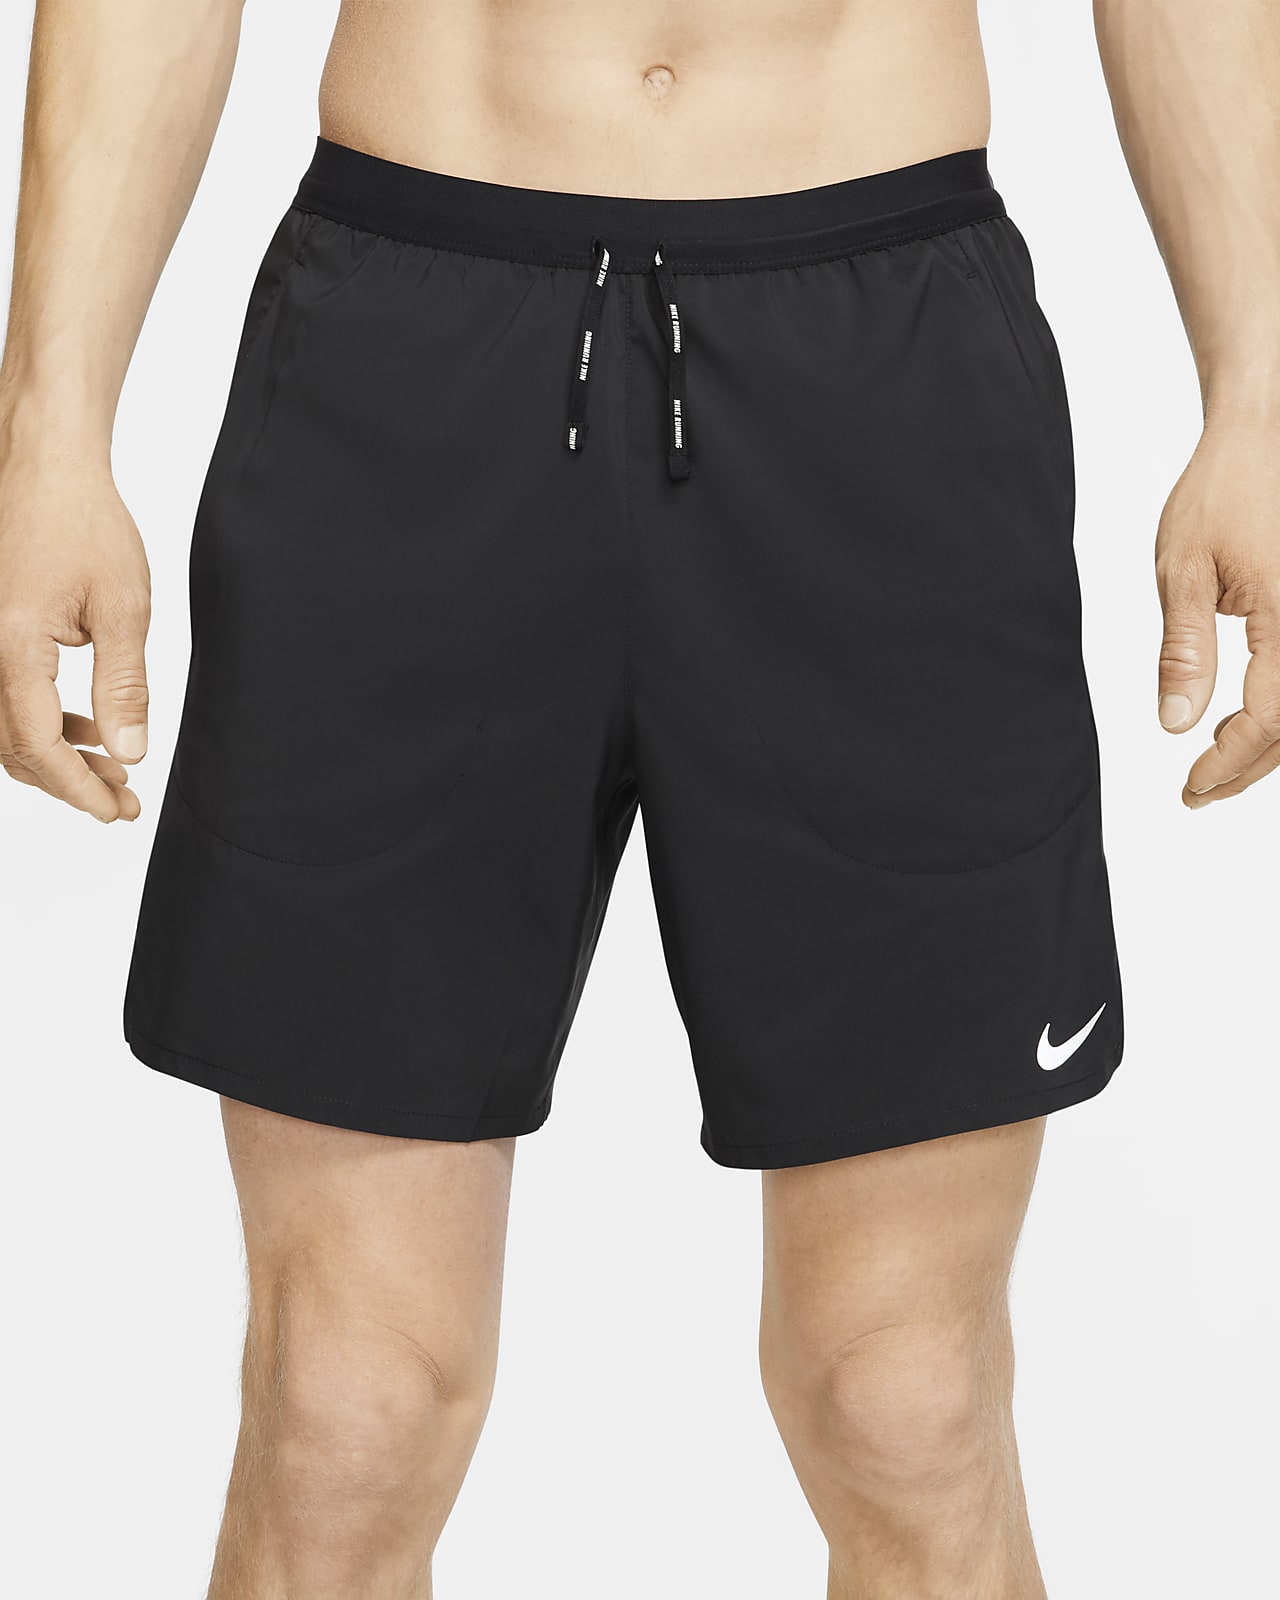 Injection antenna town Nike Flex Stride Men's 18cm (approx.) 2-in-1 Running Shorts. Nike SA